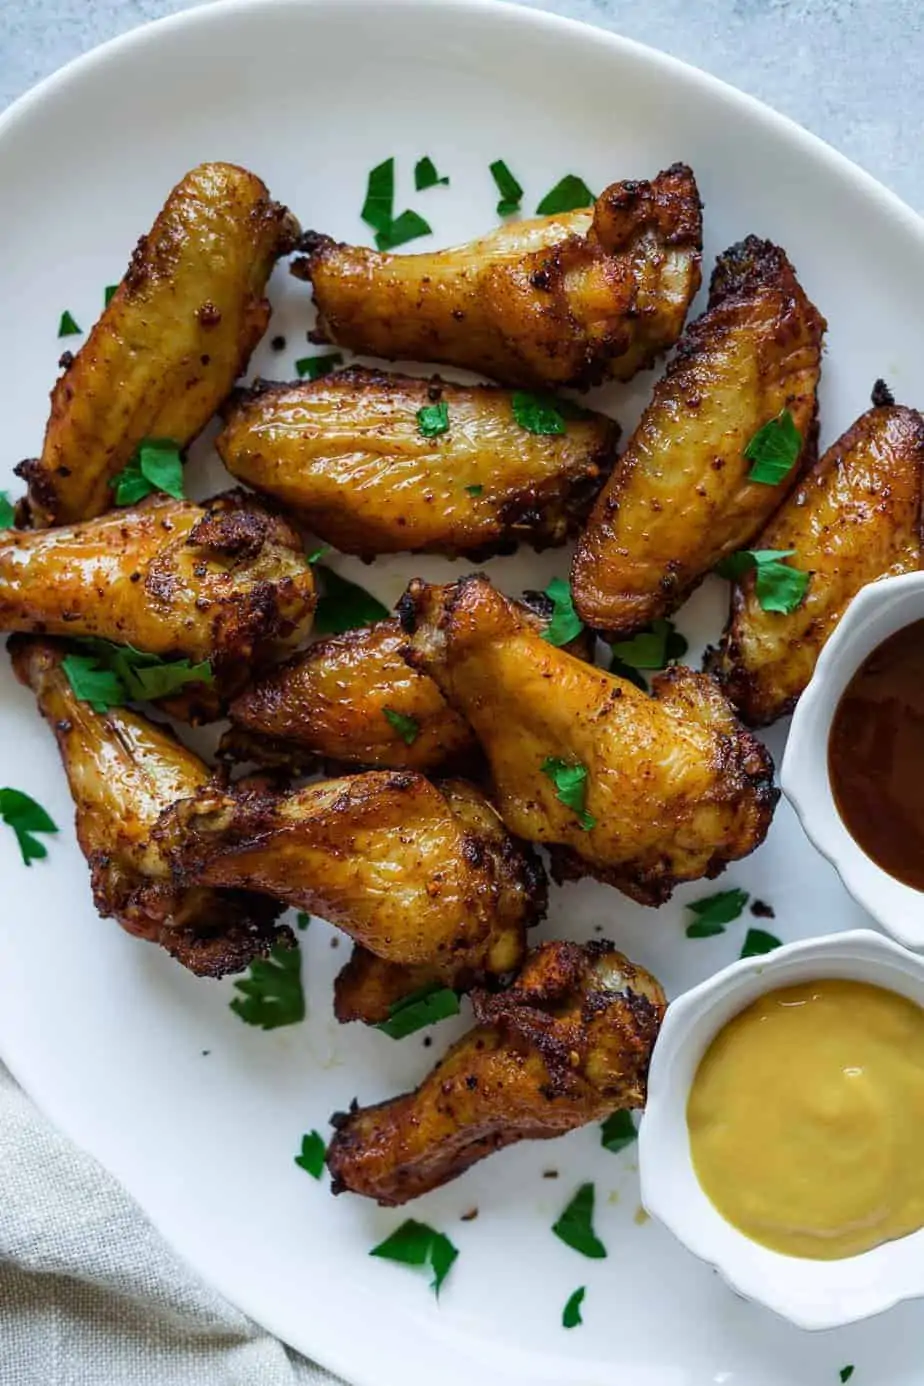 sprinkle with parsley and serve with bbq sauce and honey mustard sauce the wings